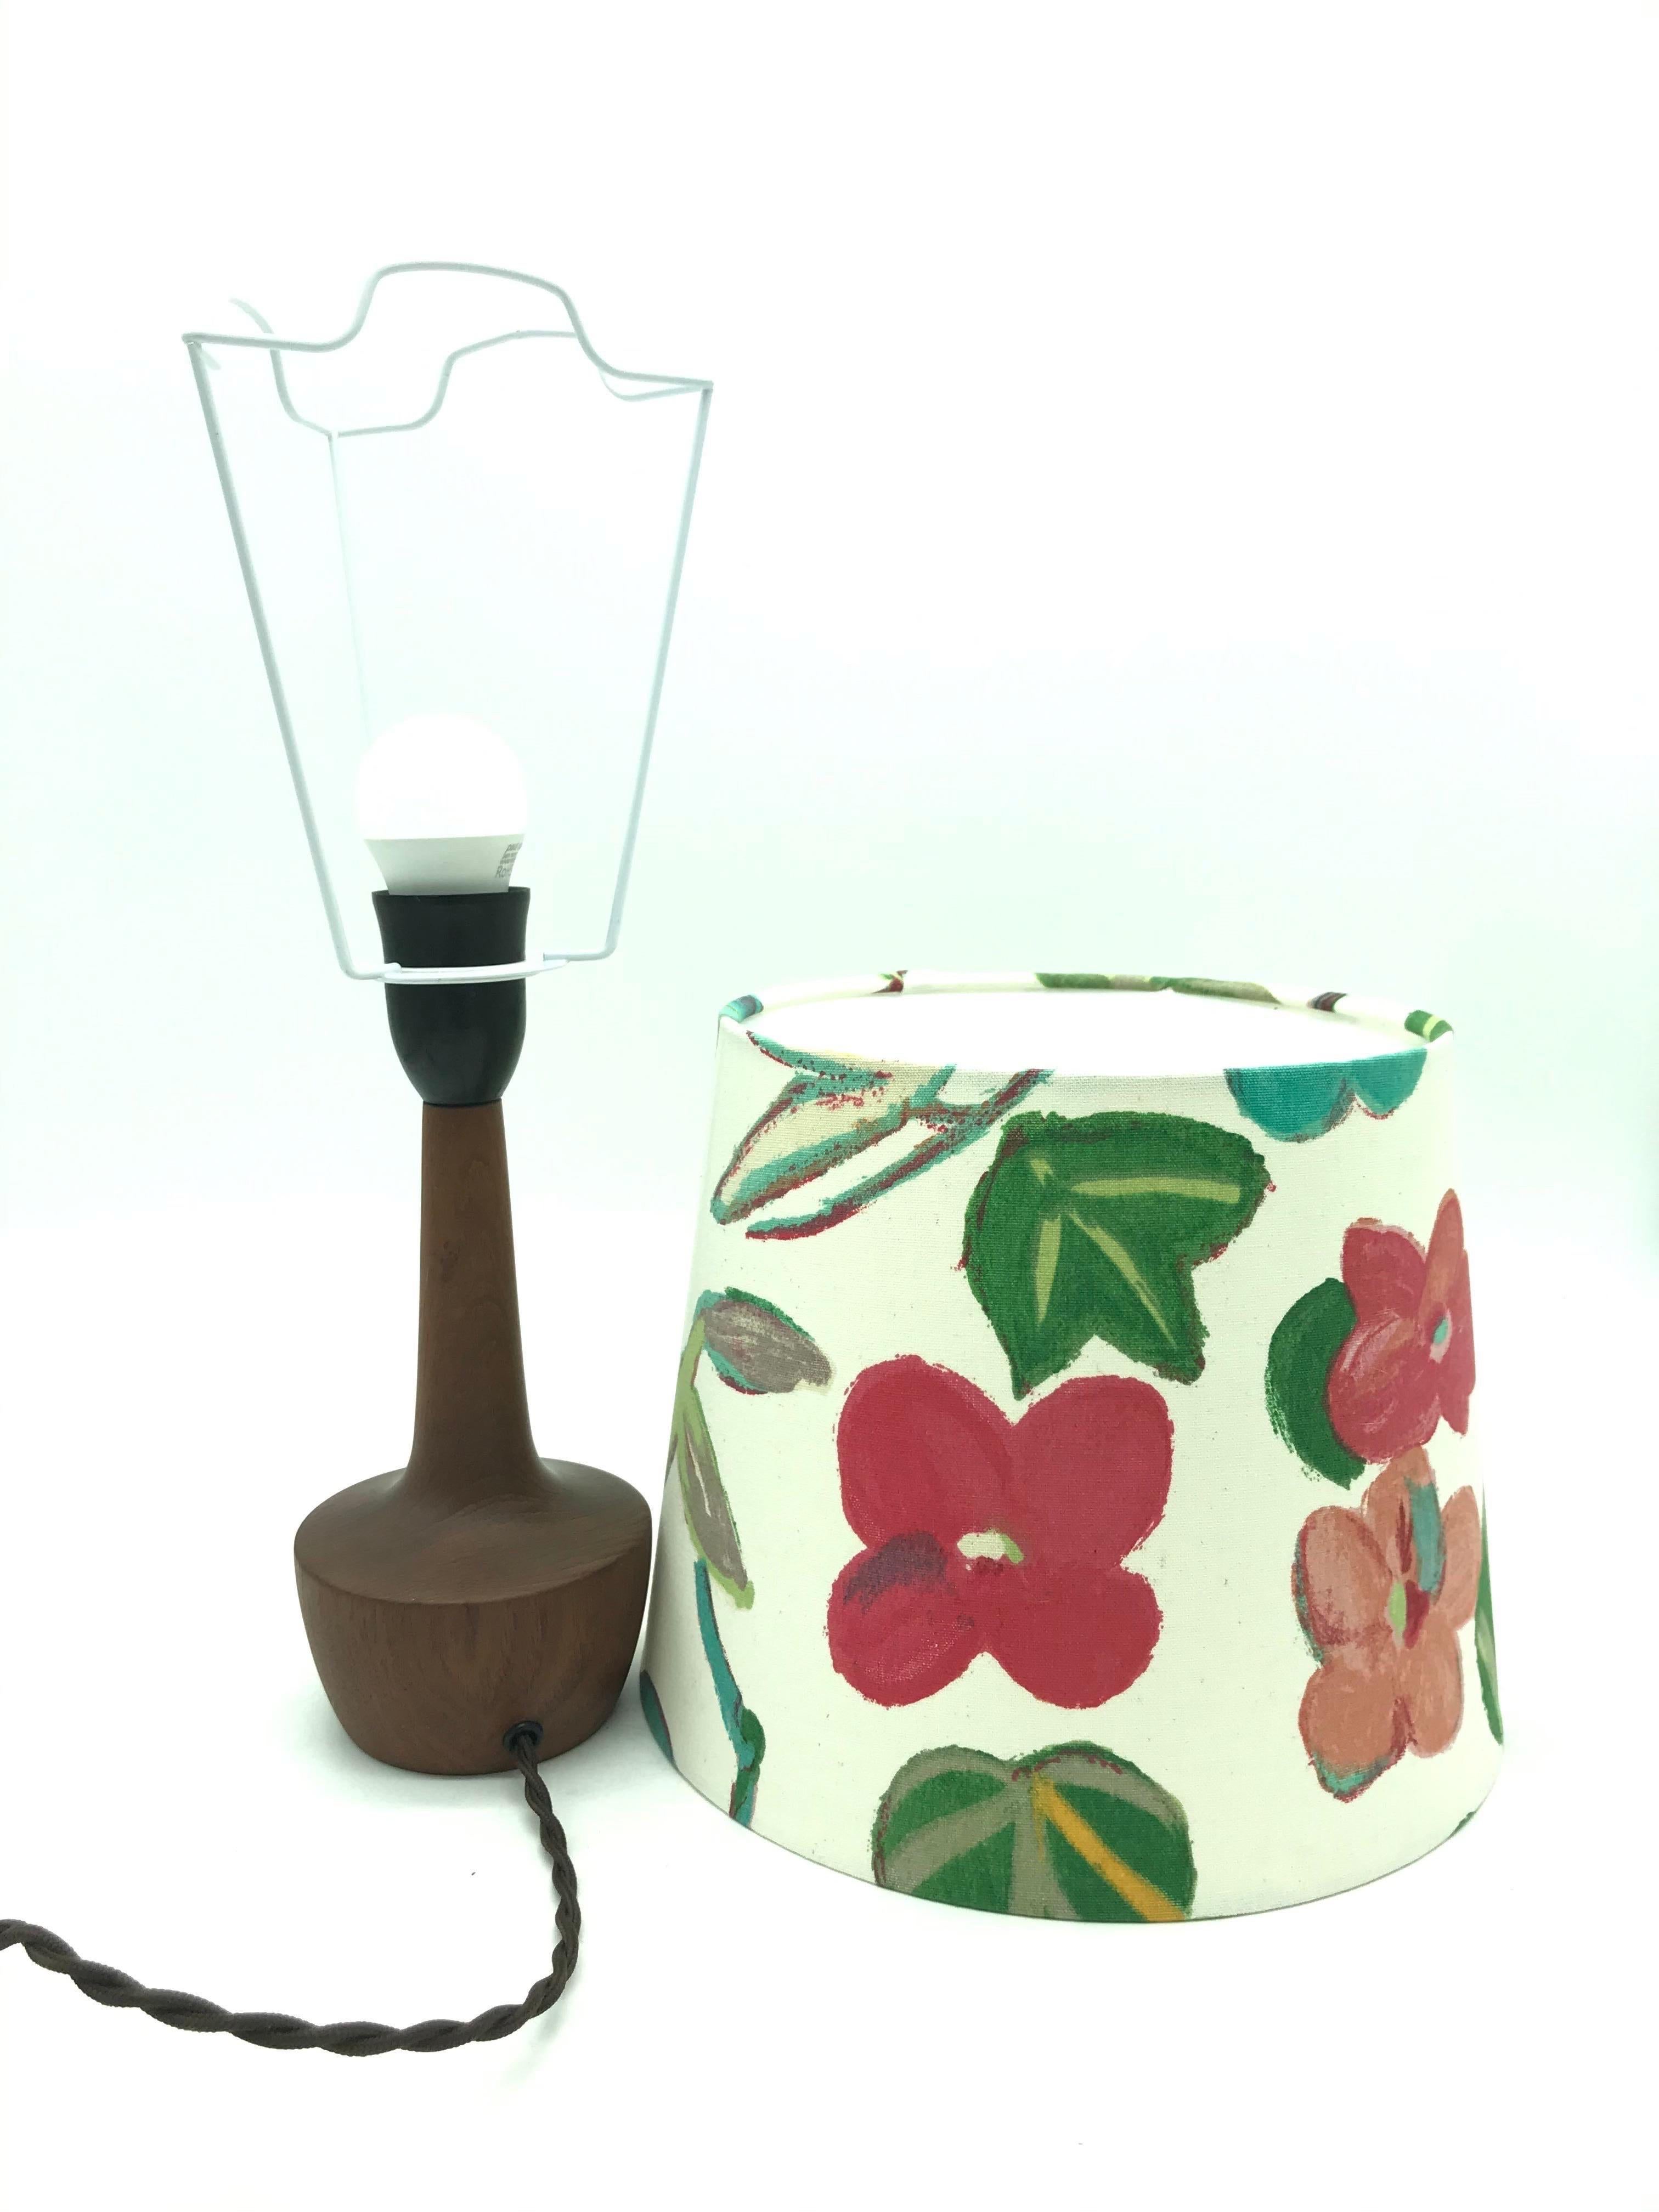 Danish Mid-Century Modern Solid Teak Table Lamp with an Artbymay Lamp Shade 4